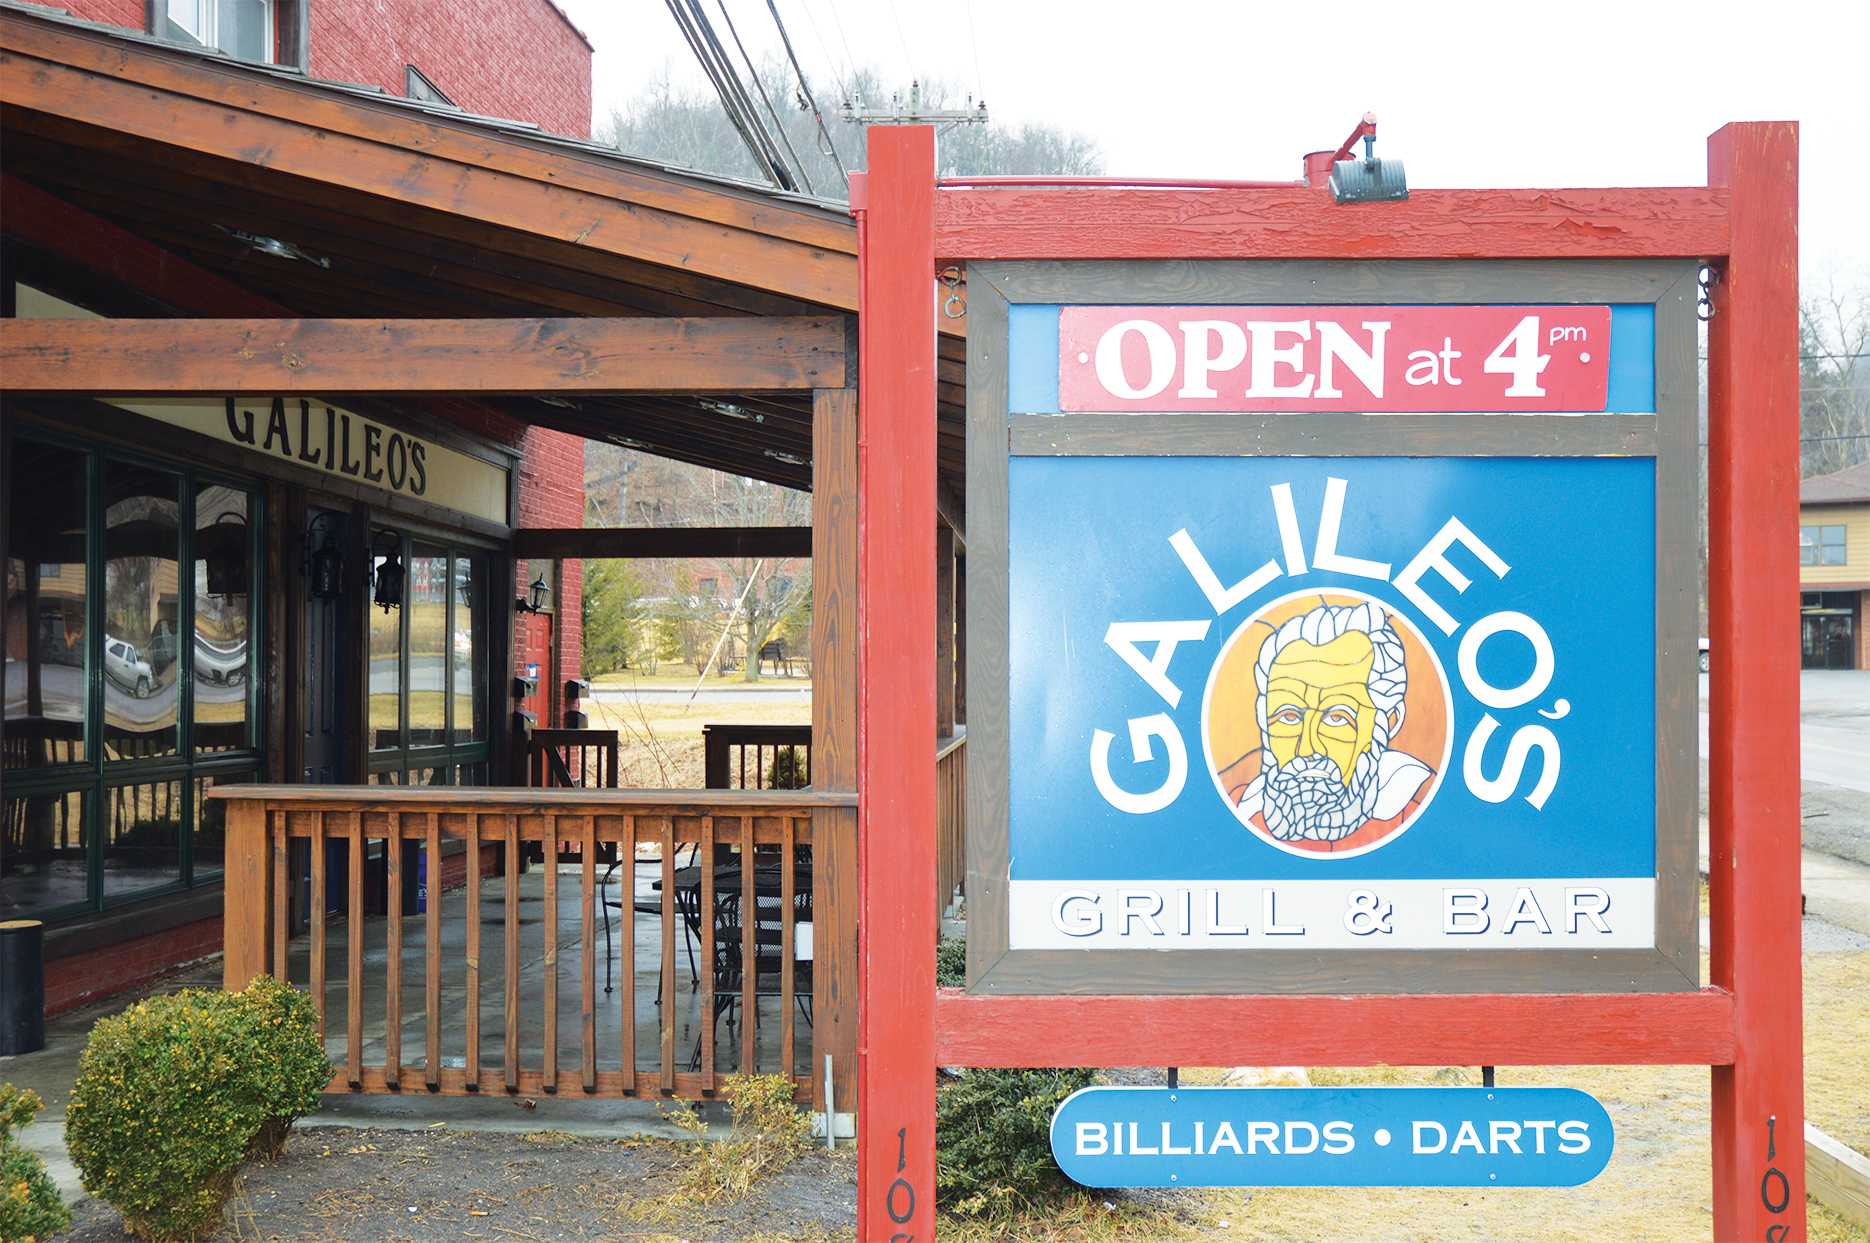 Galileo’s Grill and Bar uses a phone application scanner to check customers’ IDs before entering. Owner Mark Dickson said Galileo staff usually catch six to seven underaged customers using fake IDs per week. Photo by Gerrit van Genderen  |  The Appalachian